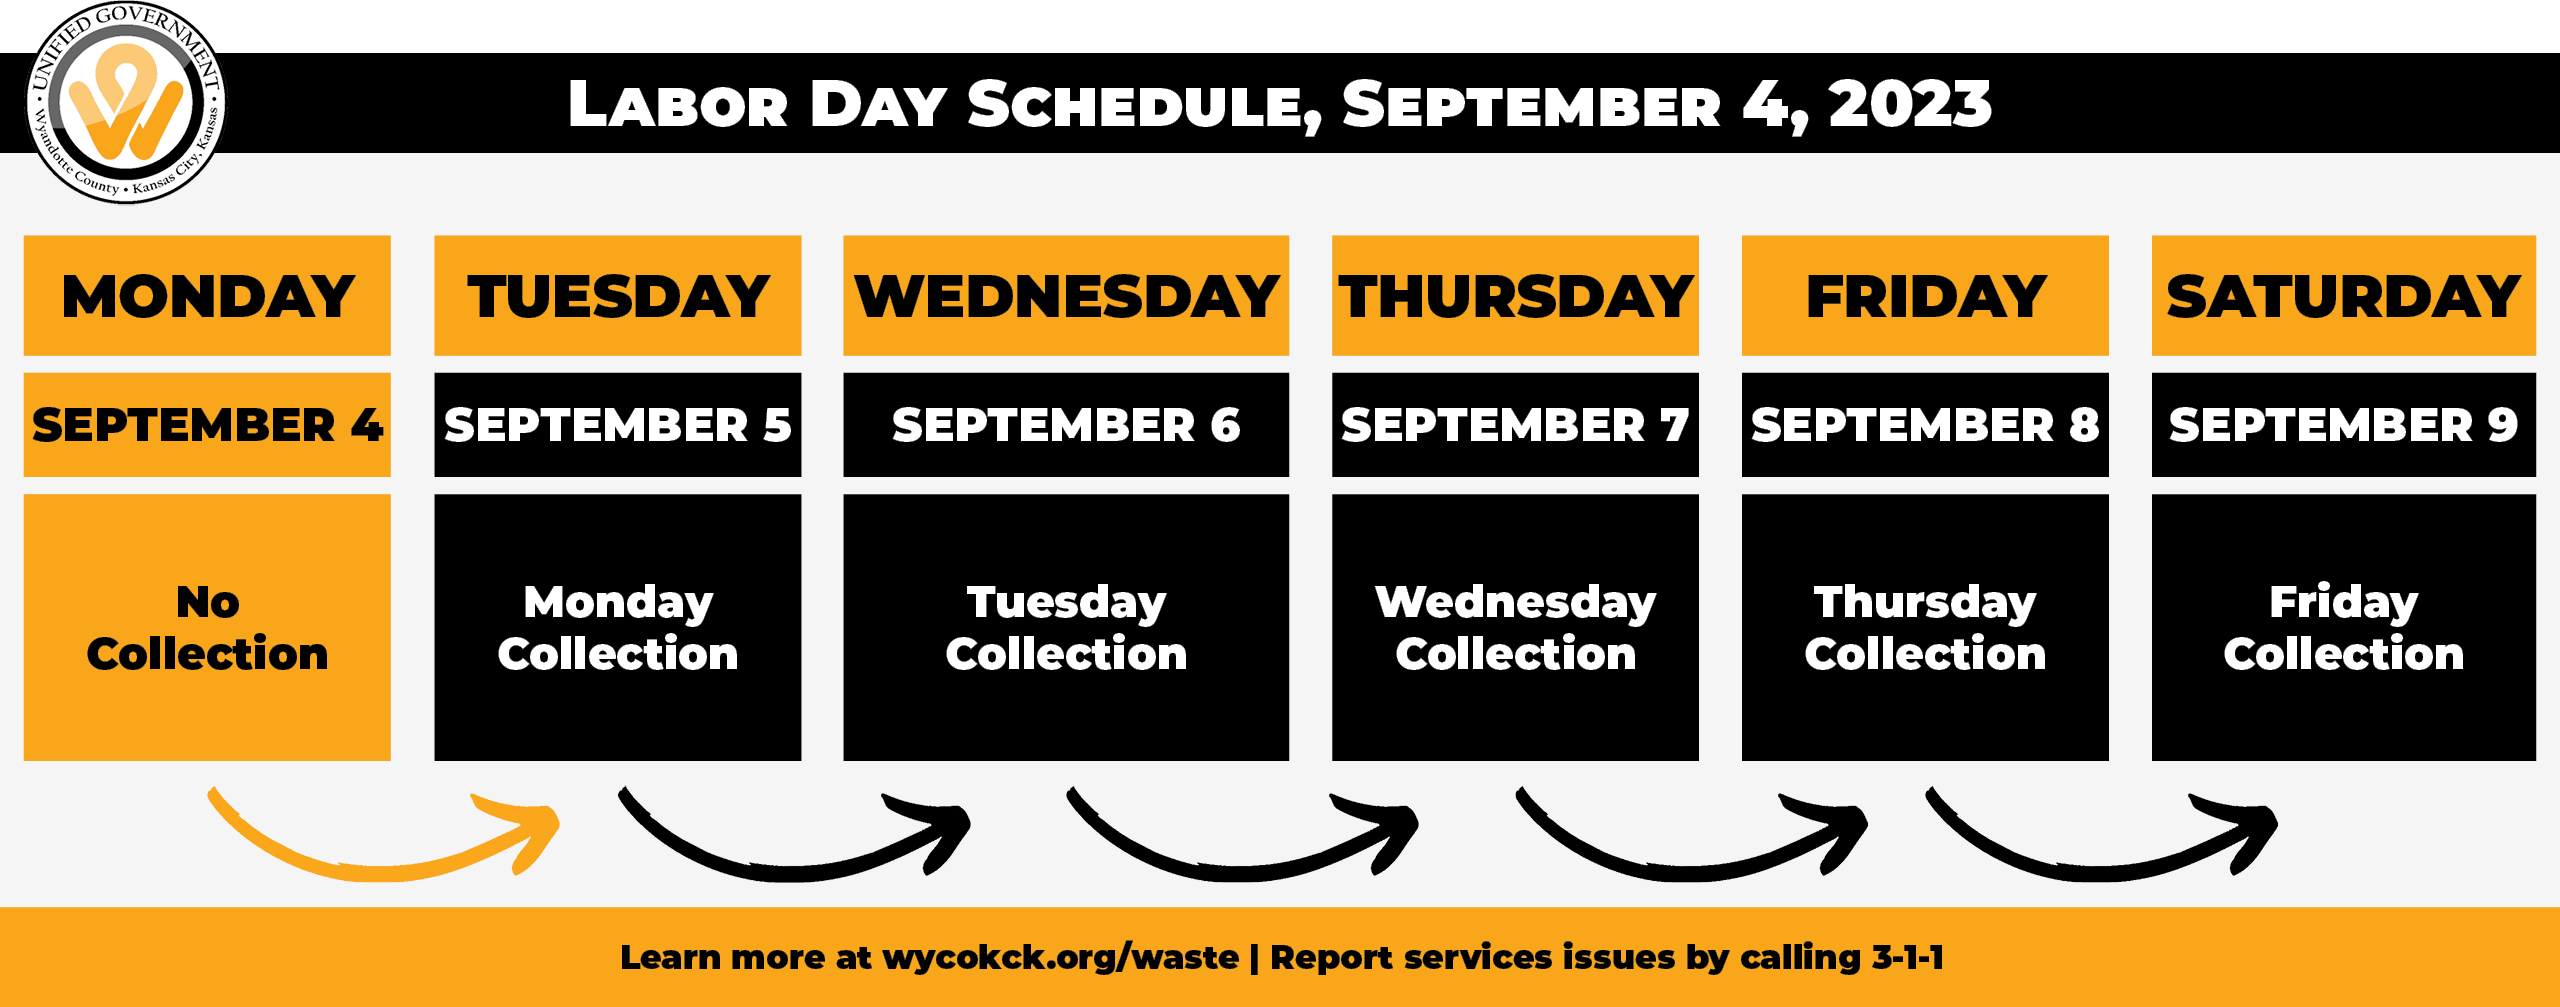 A graphic showing the residential trash and recycling collection schedule for Labor Day 2023